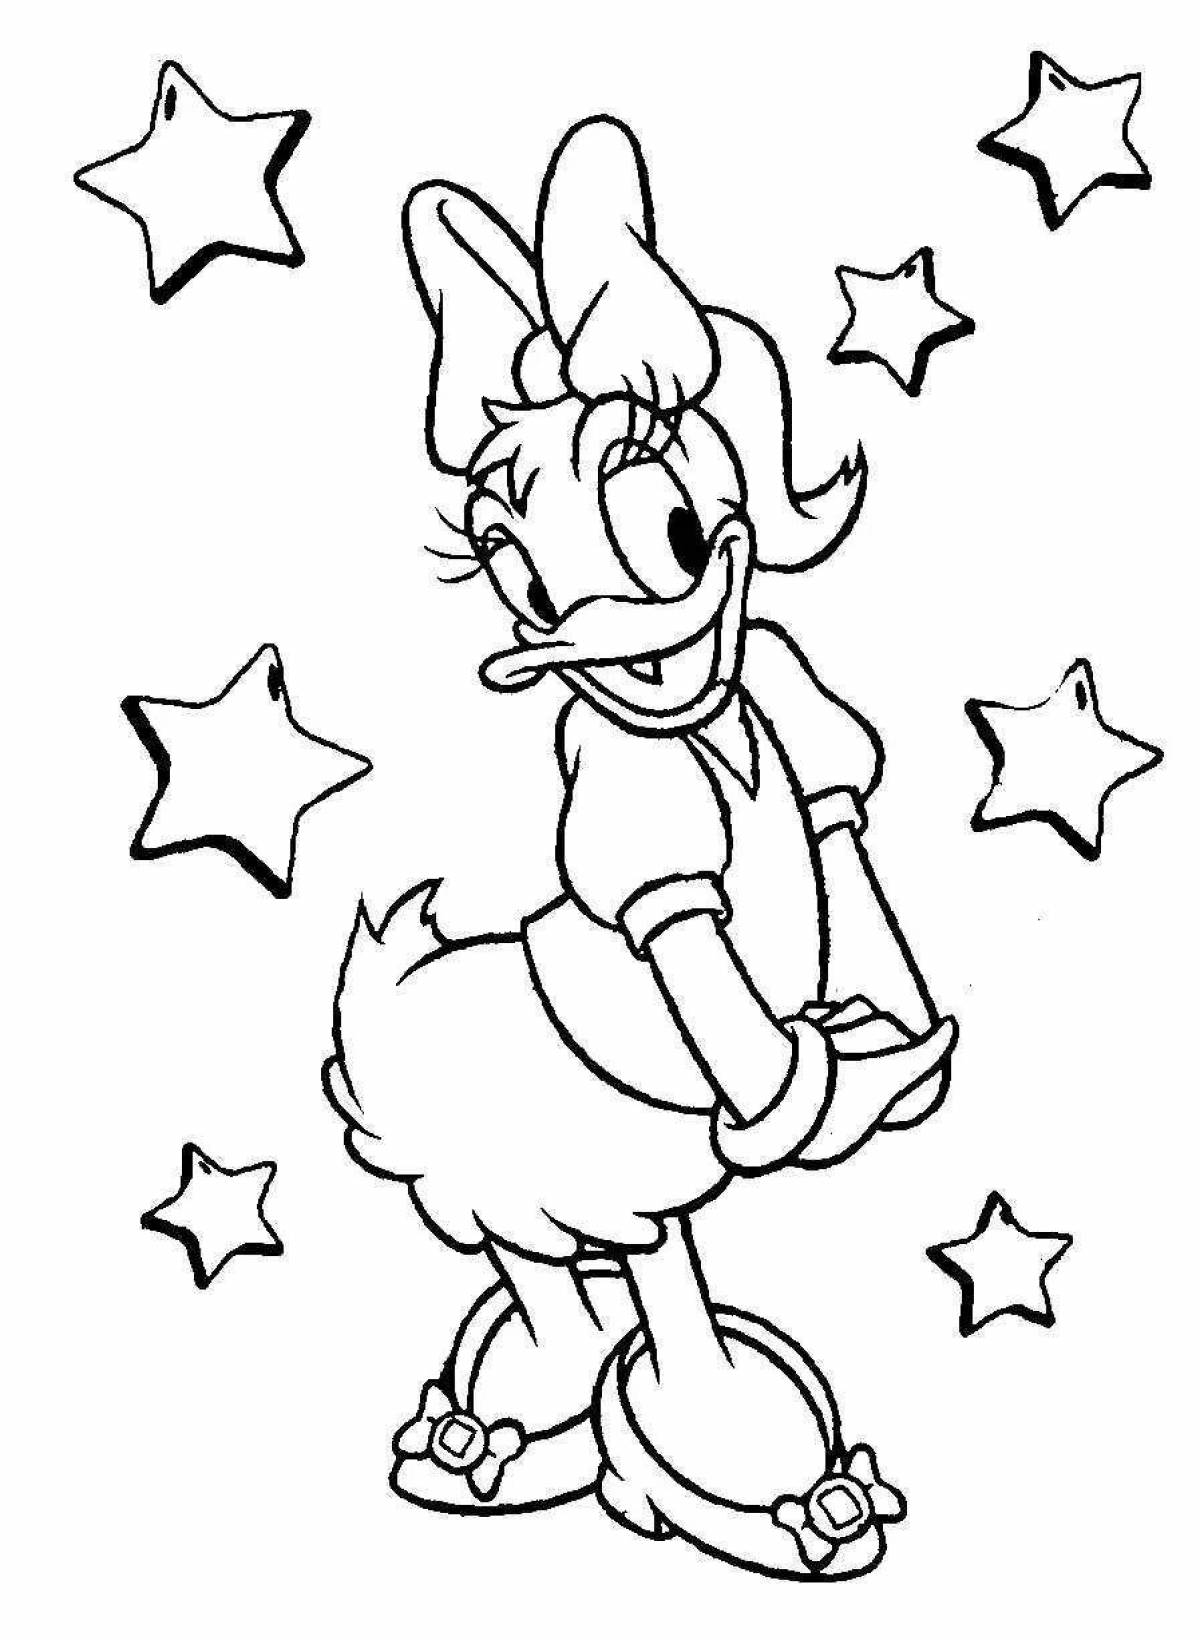 Attractive cartoon character coloring page